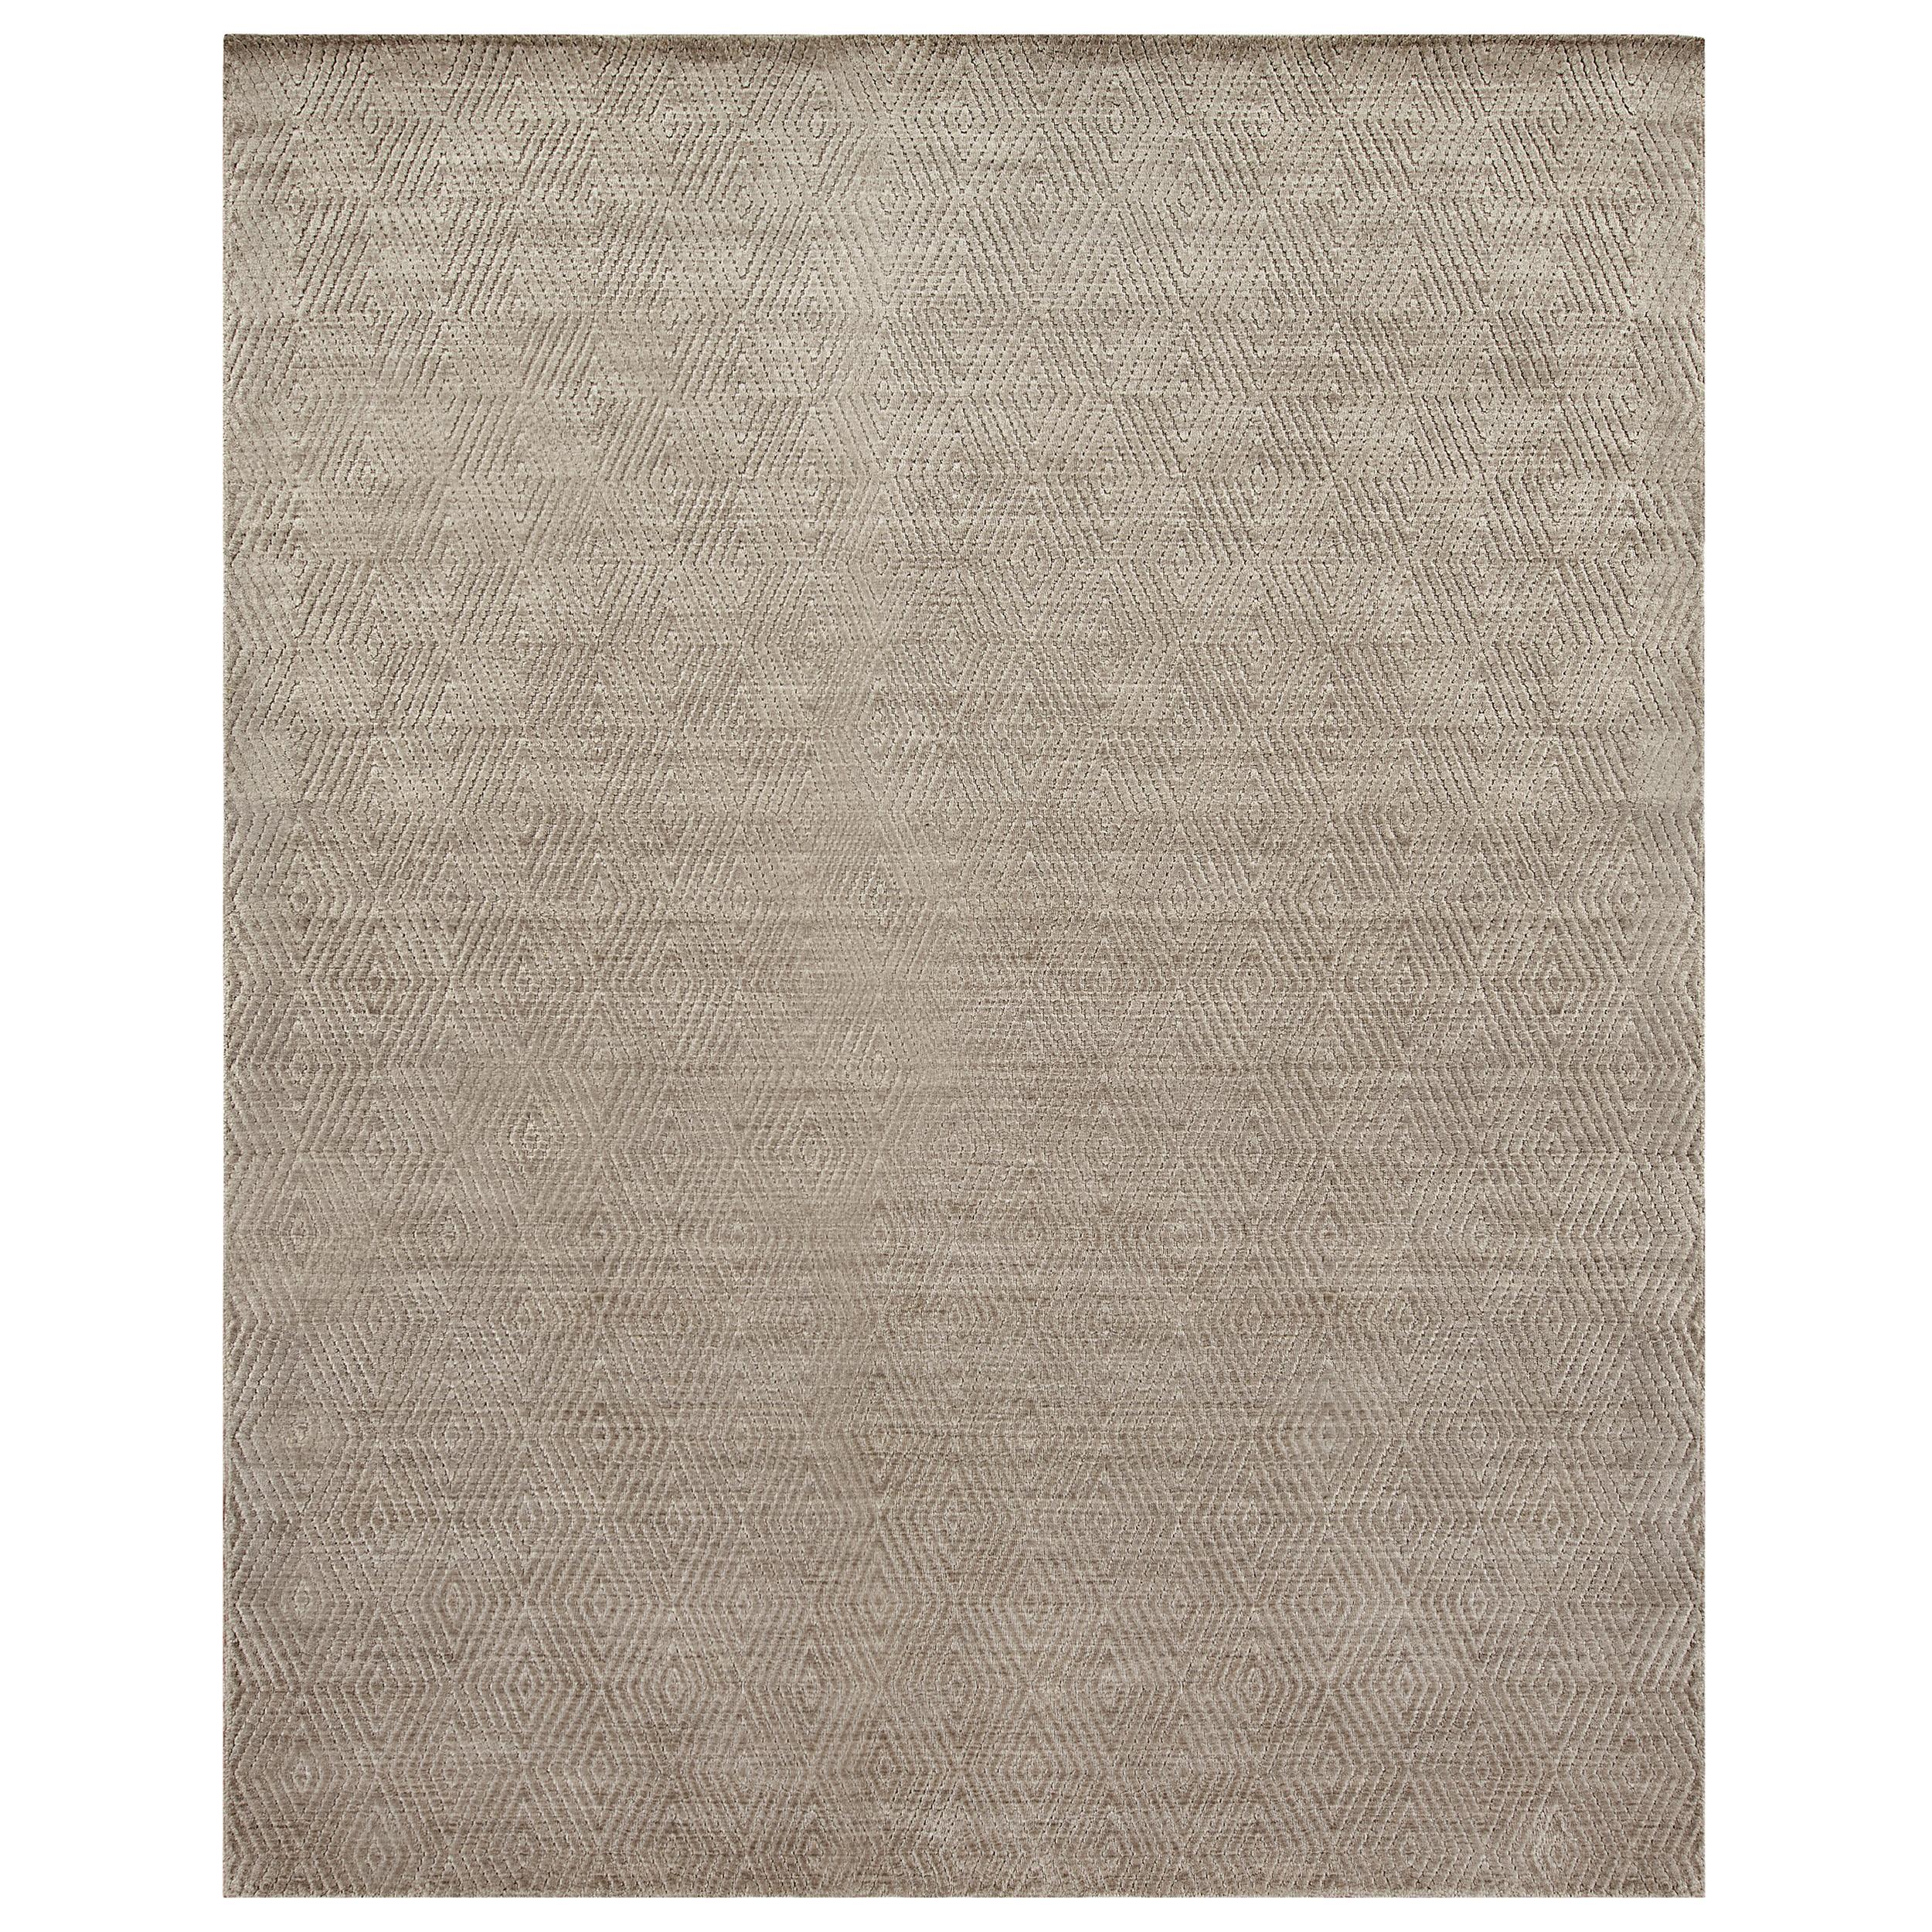 Luxury Modern Hand-Knotted Harlequin Silver 10x14 Rug